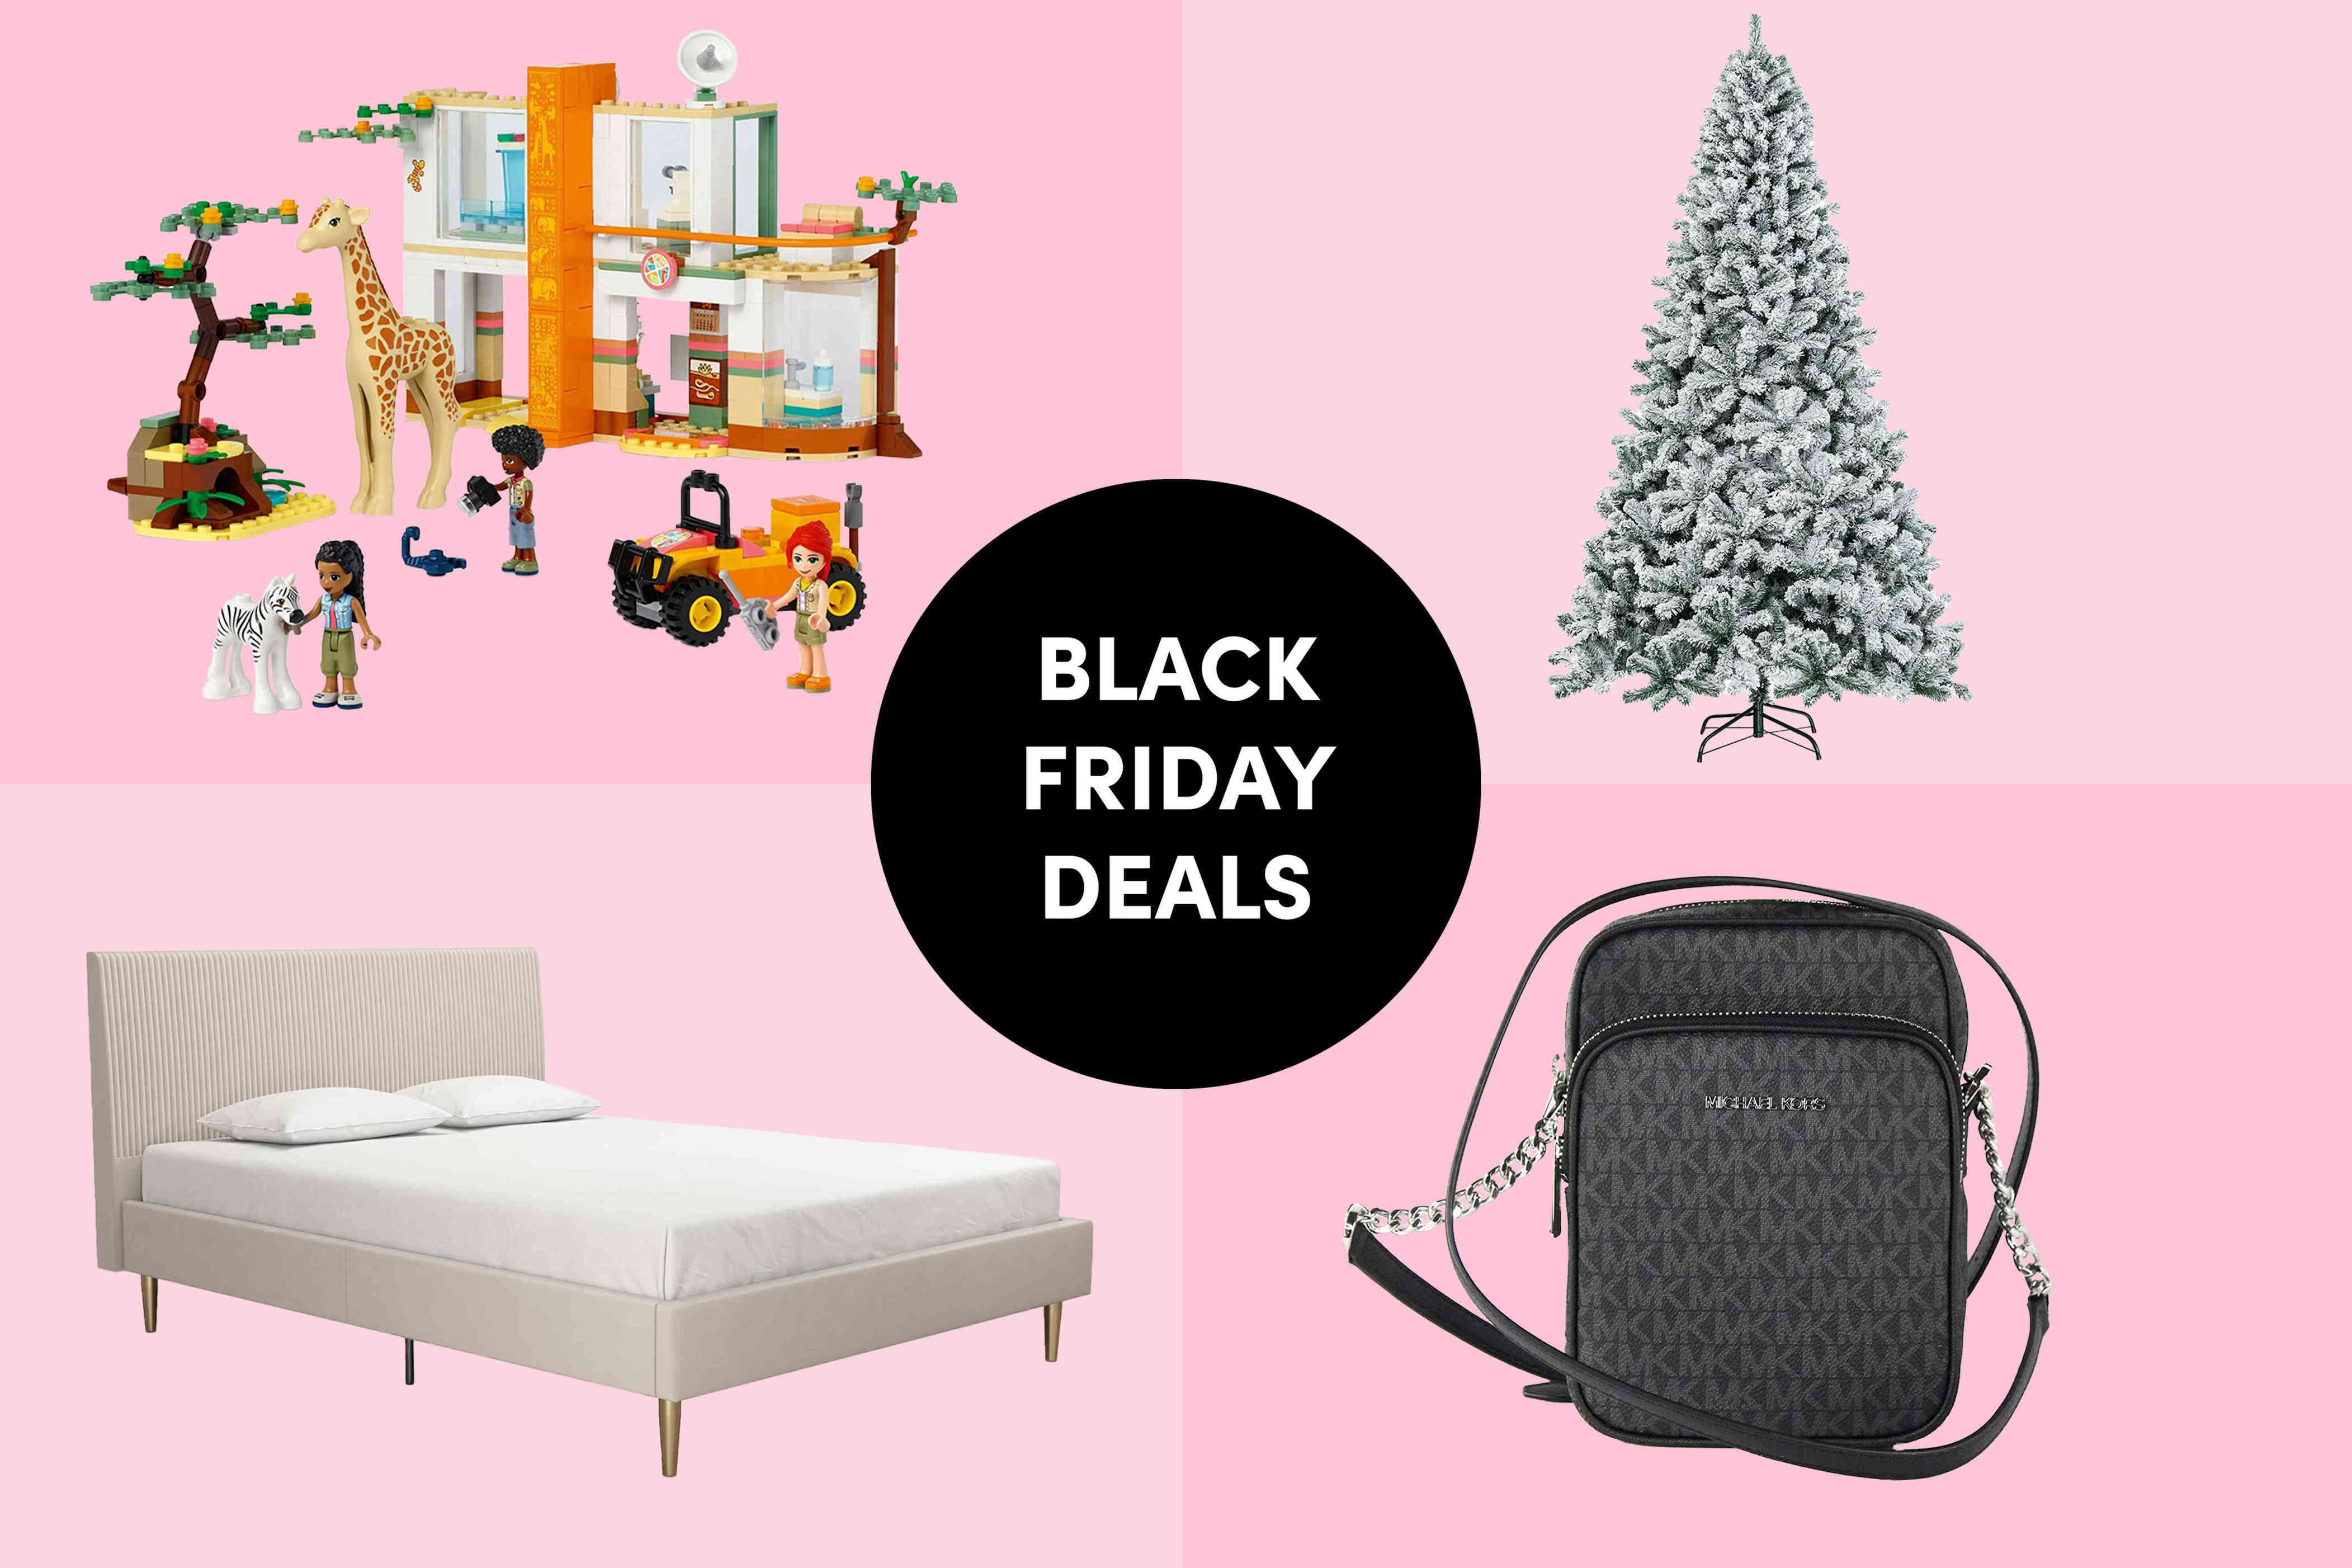 100 Best Walmart Black Friday Deals Toys, Clothes, Decor, and More—Up